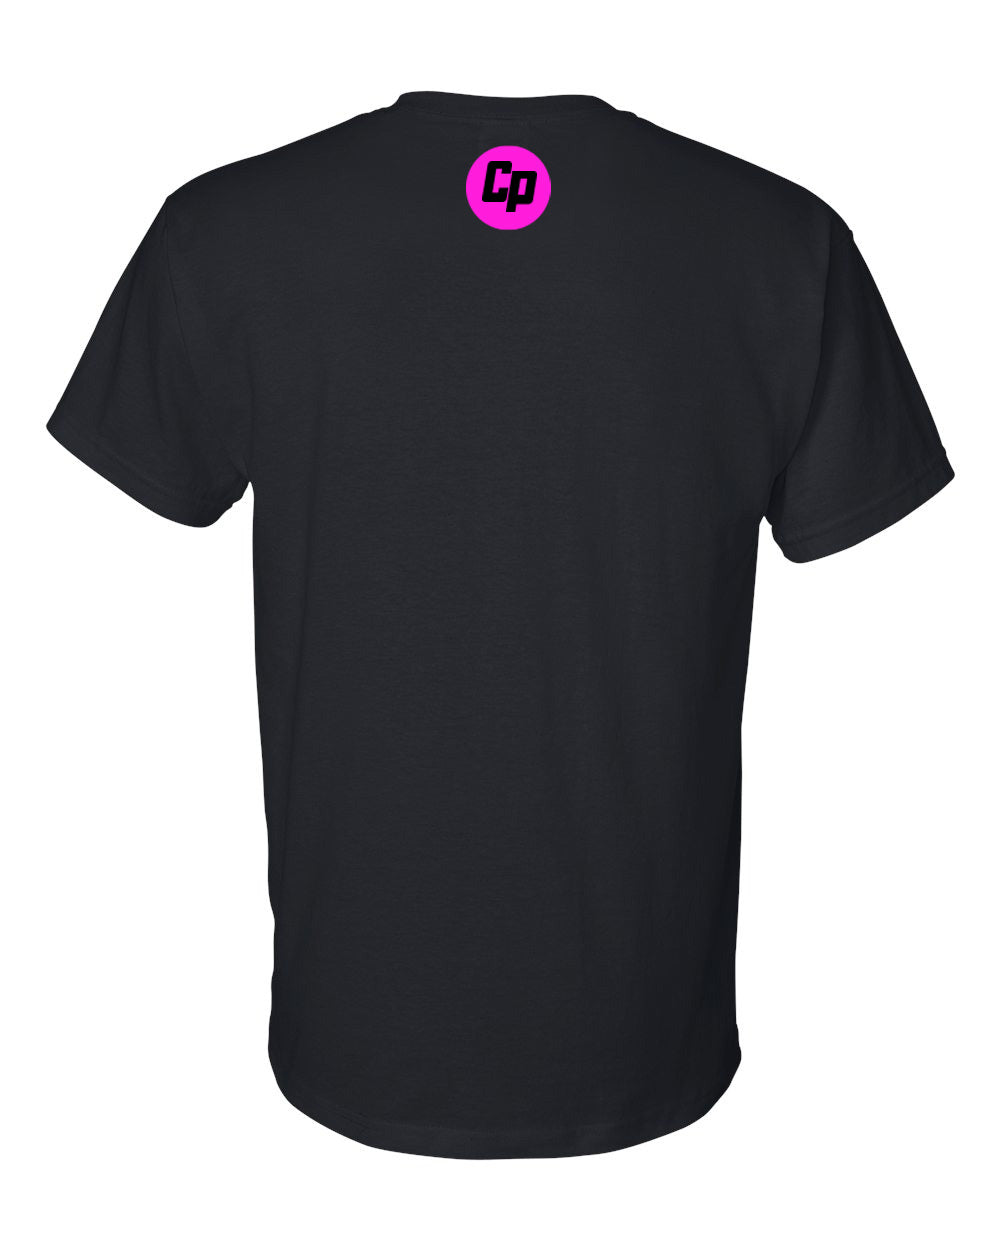 Complete Performance Shirt - Pink